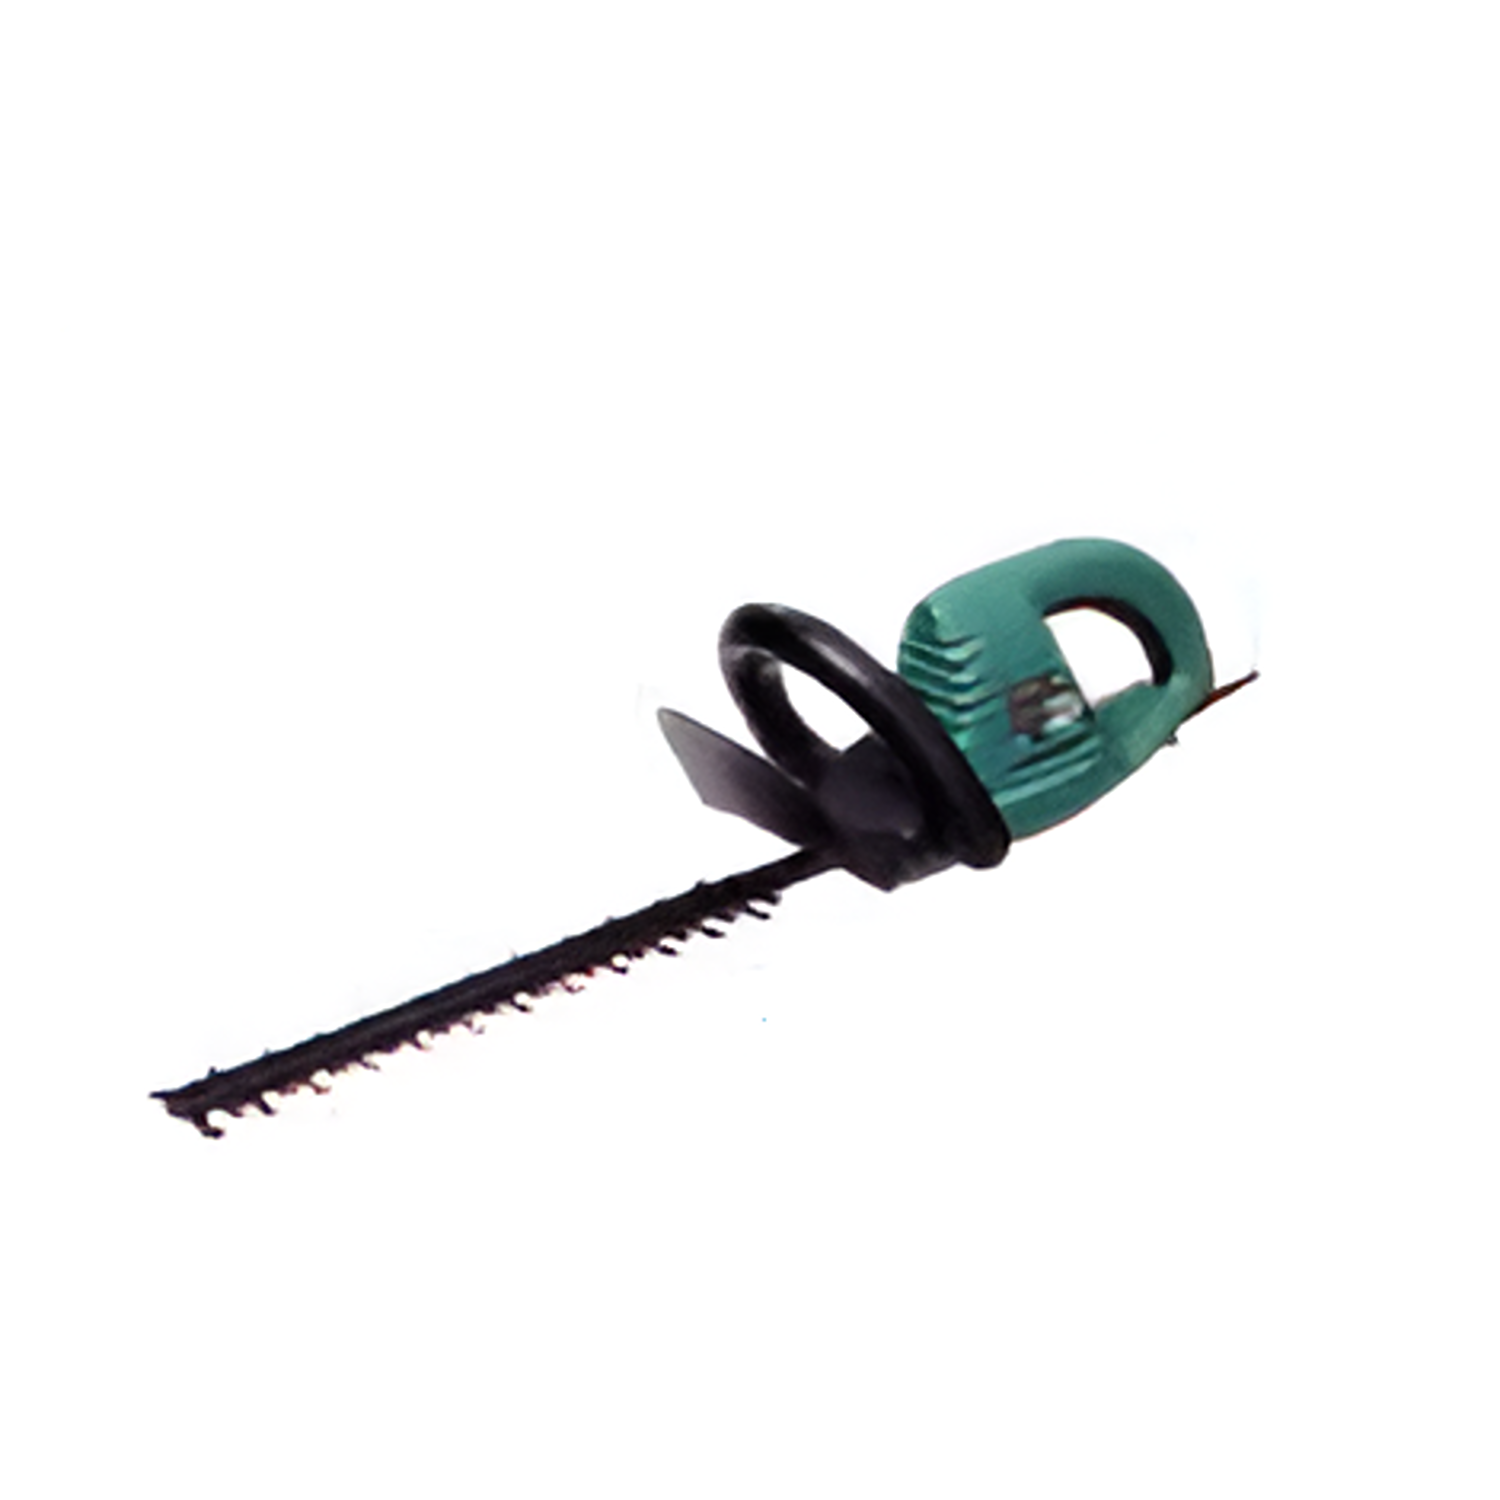 YEW AIK AC00427 Hedge Trimmer Power Tools AHS 40 -24 - Premium Power Tools from YEW AIK - Shop now at Yew Aik.